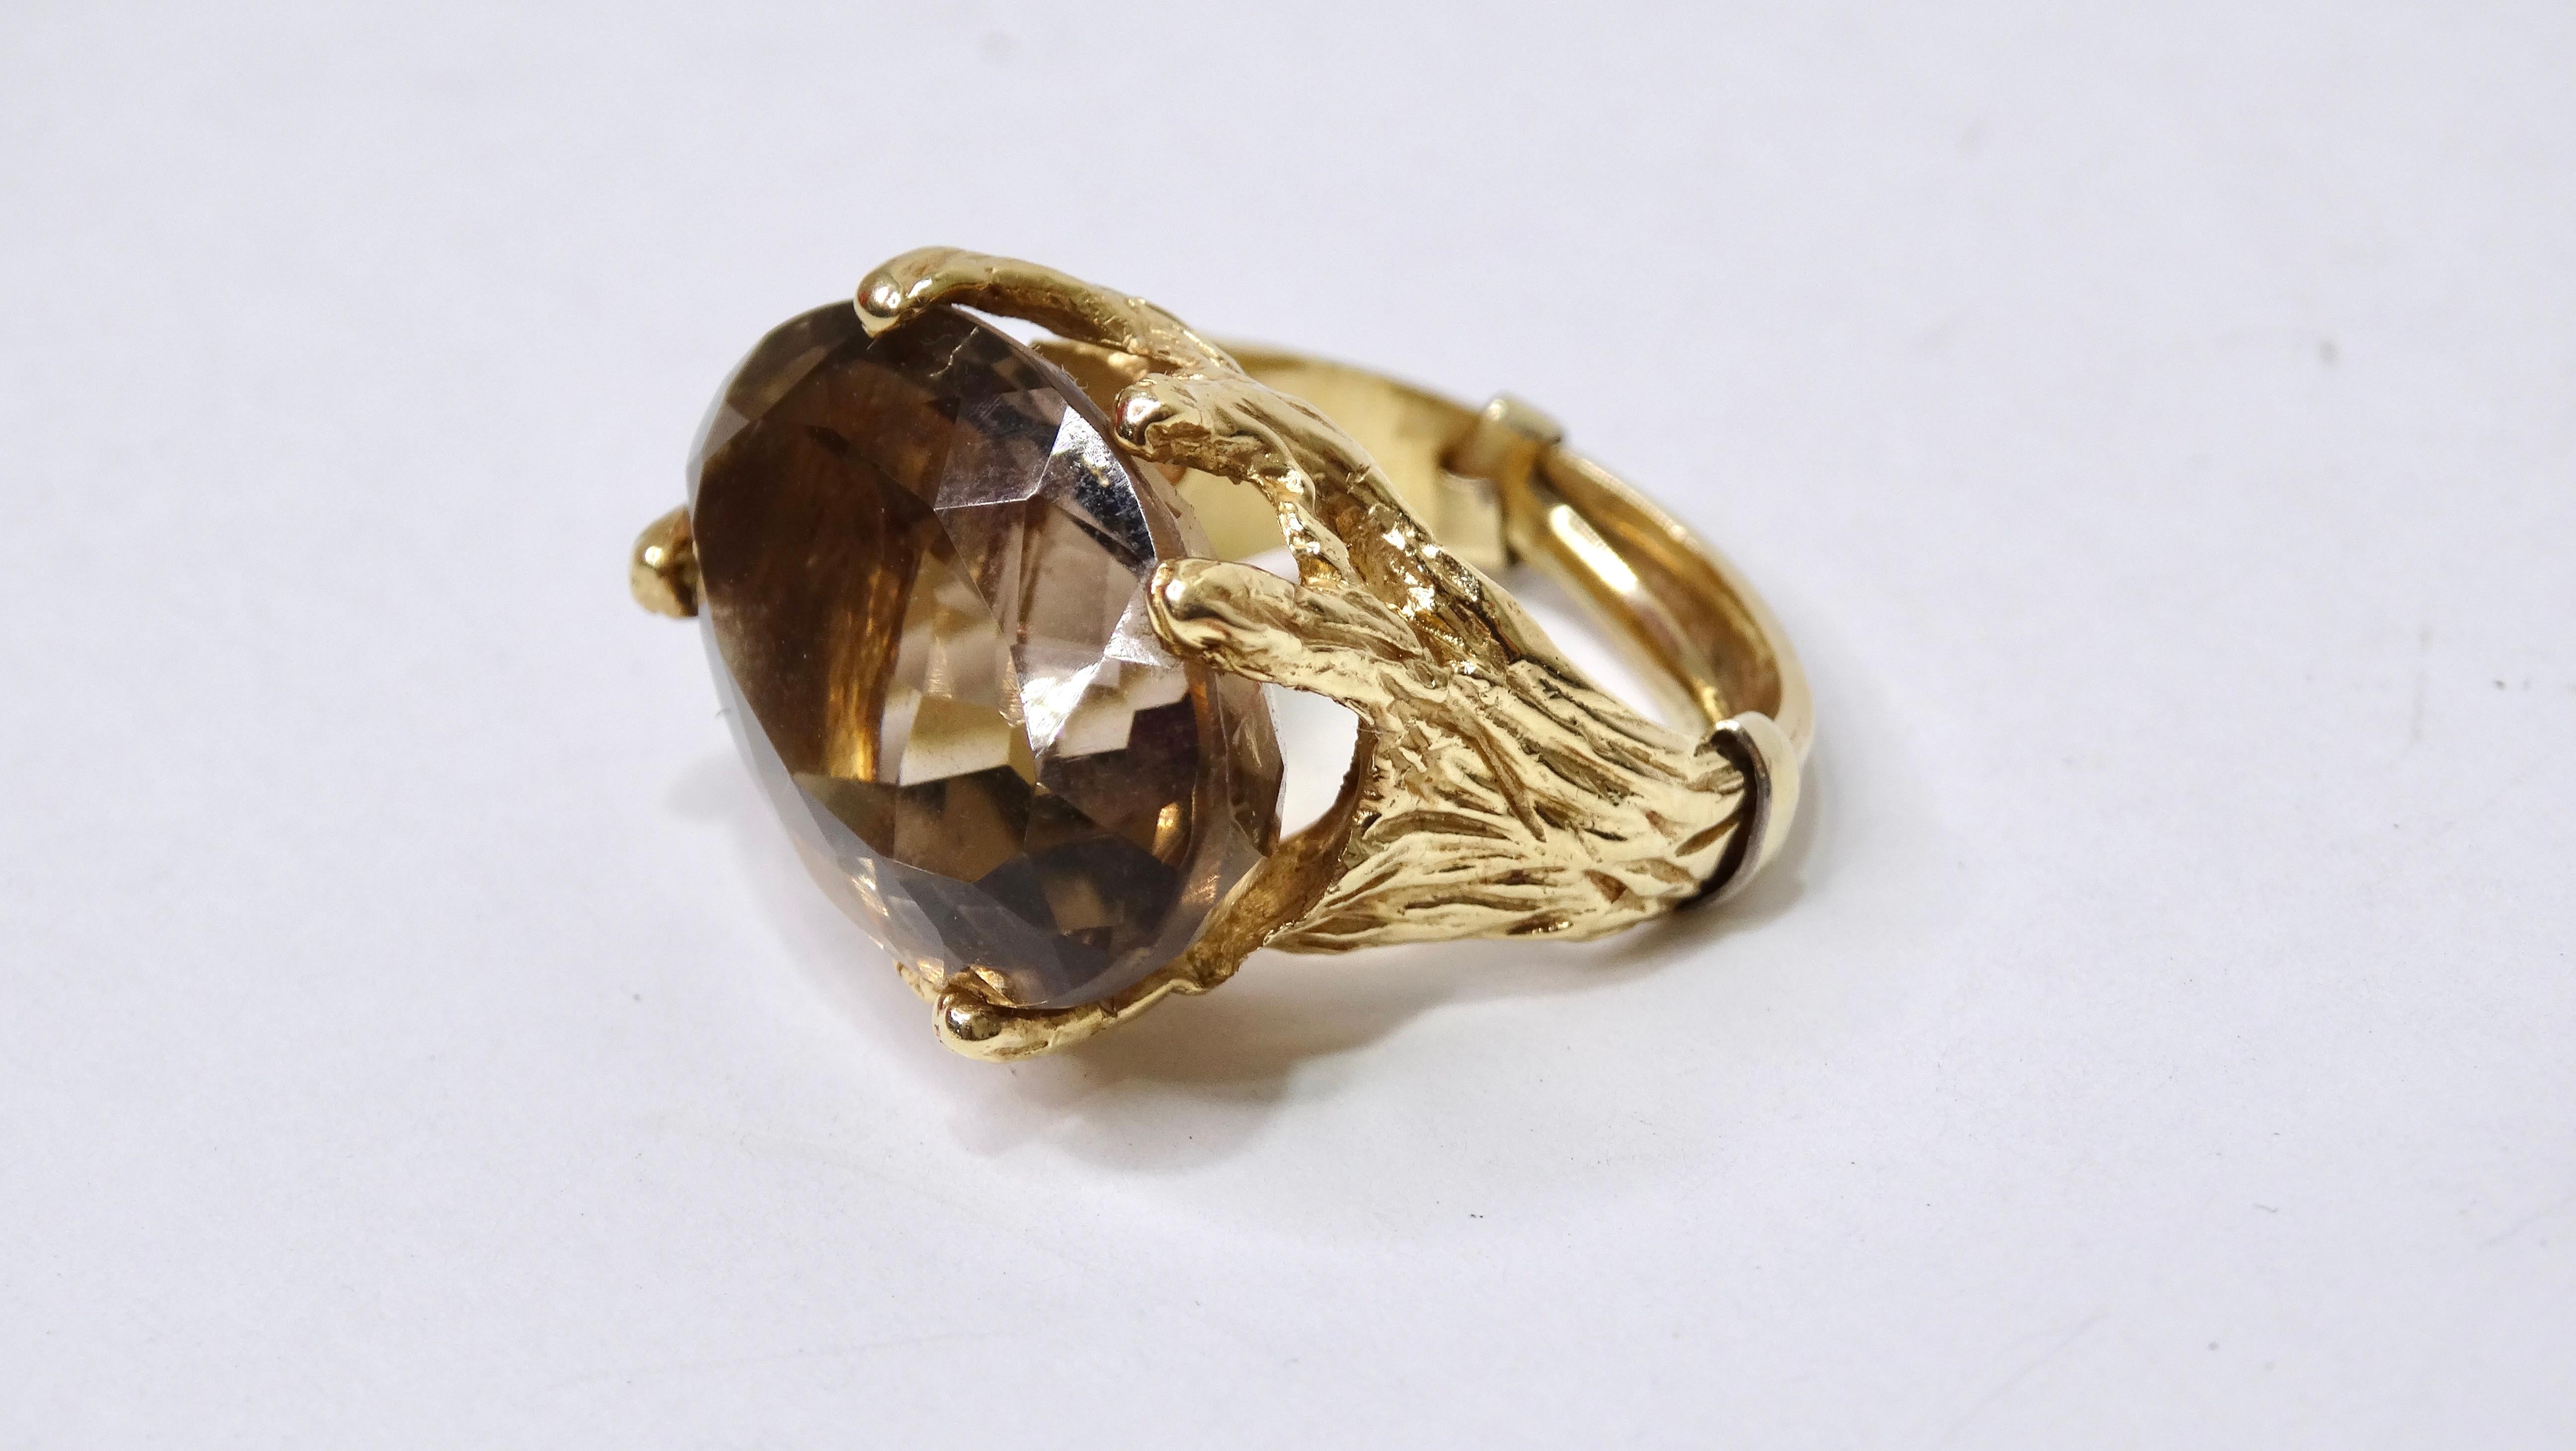 This impeccably designed ring can be yours today! Don't miss your chance to get your hands on this massive Smokey Quartz stone in an oval cut. This will be your new favorite cocktail ring in your collection perfect for making a statement. Notice the